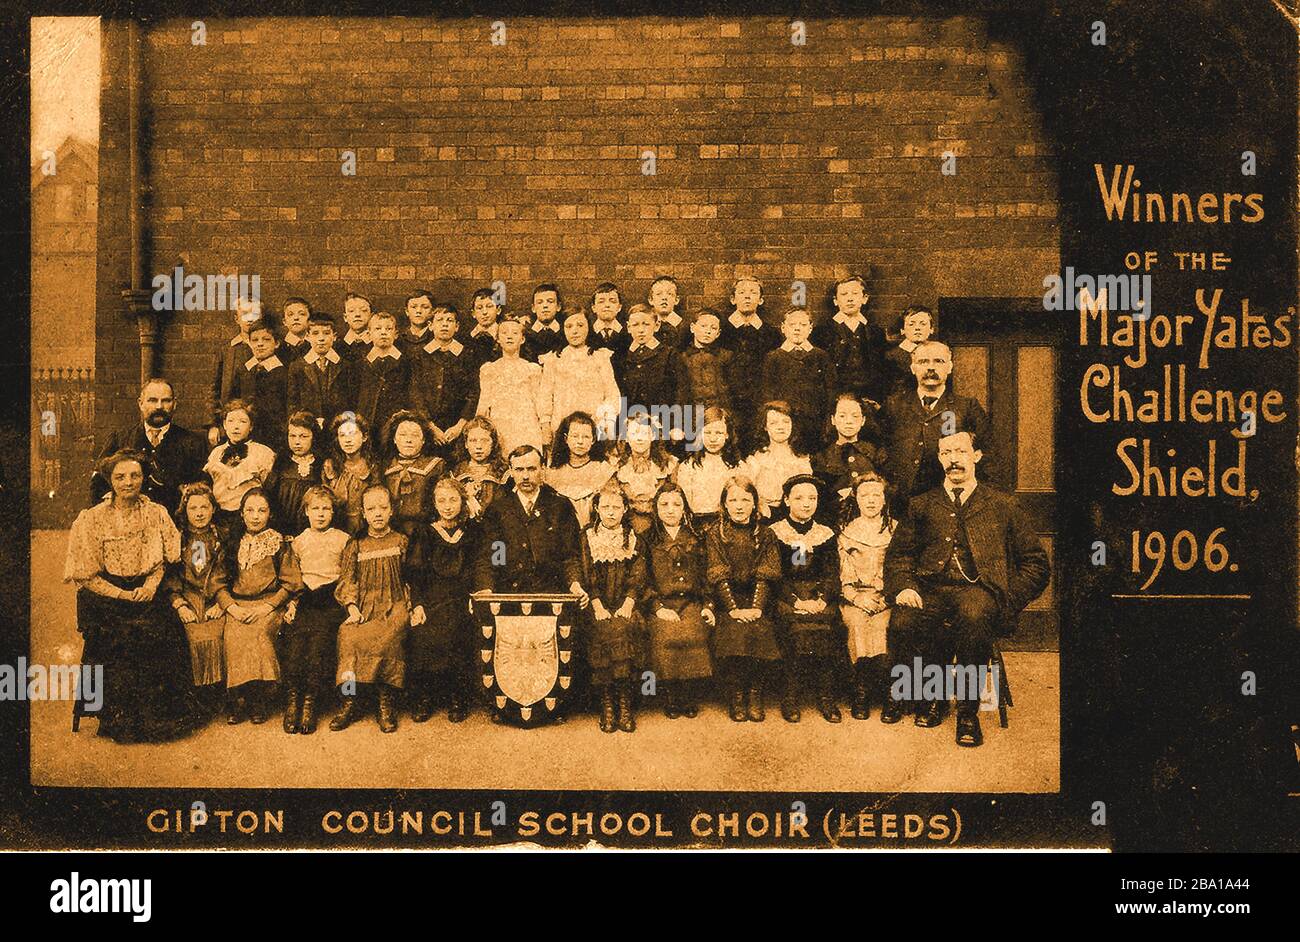 Gipton Council School Choir , originally Gipton Board School (opened 1897) and later Gipton Secondary School  aka Harehills Middle School  (Harehills ,Leeds) 1906. A postcard celebrating the winning of the Major Yates Challenge Shield. After closure circa 1992 it fell into dereliction before being refurbished as in 2008 as the Shine Business Centre, a local community initiative.  The school had separate boys and girls sections Stock Photo